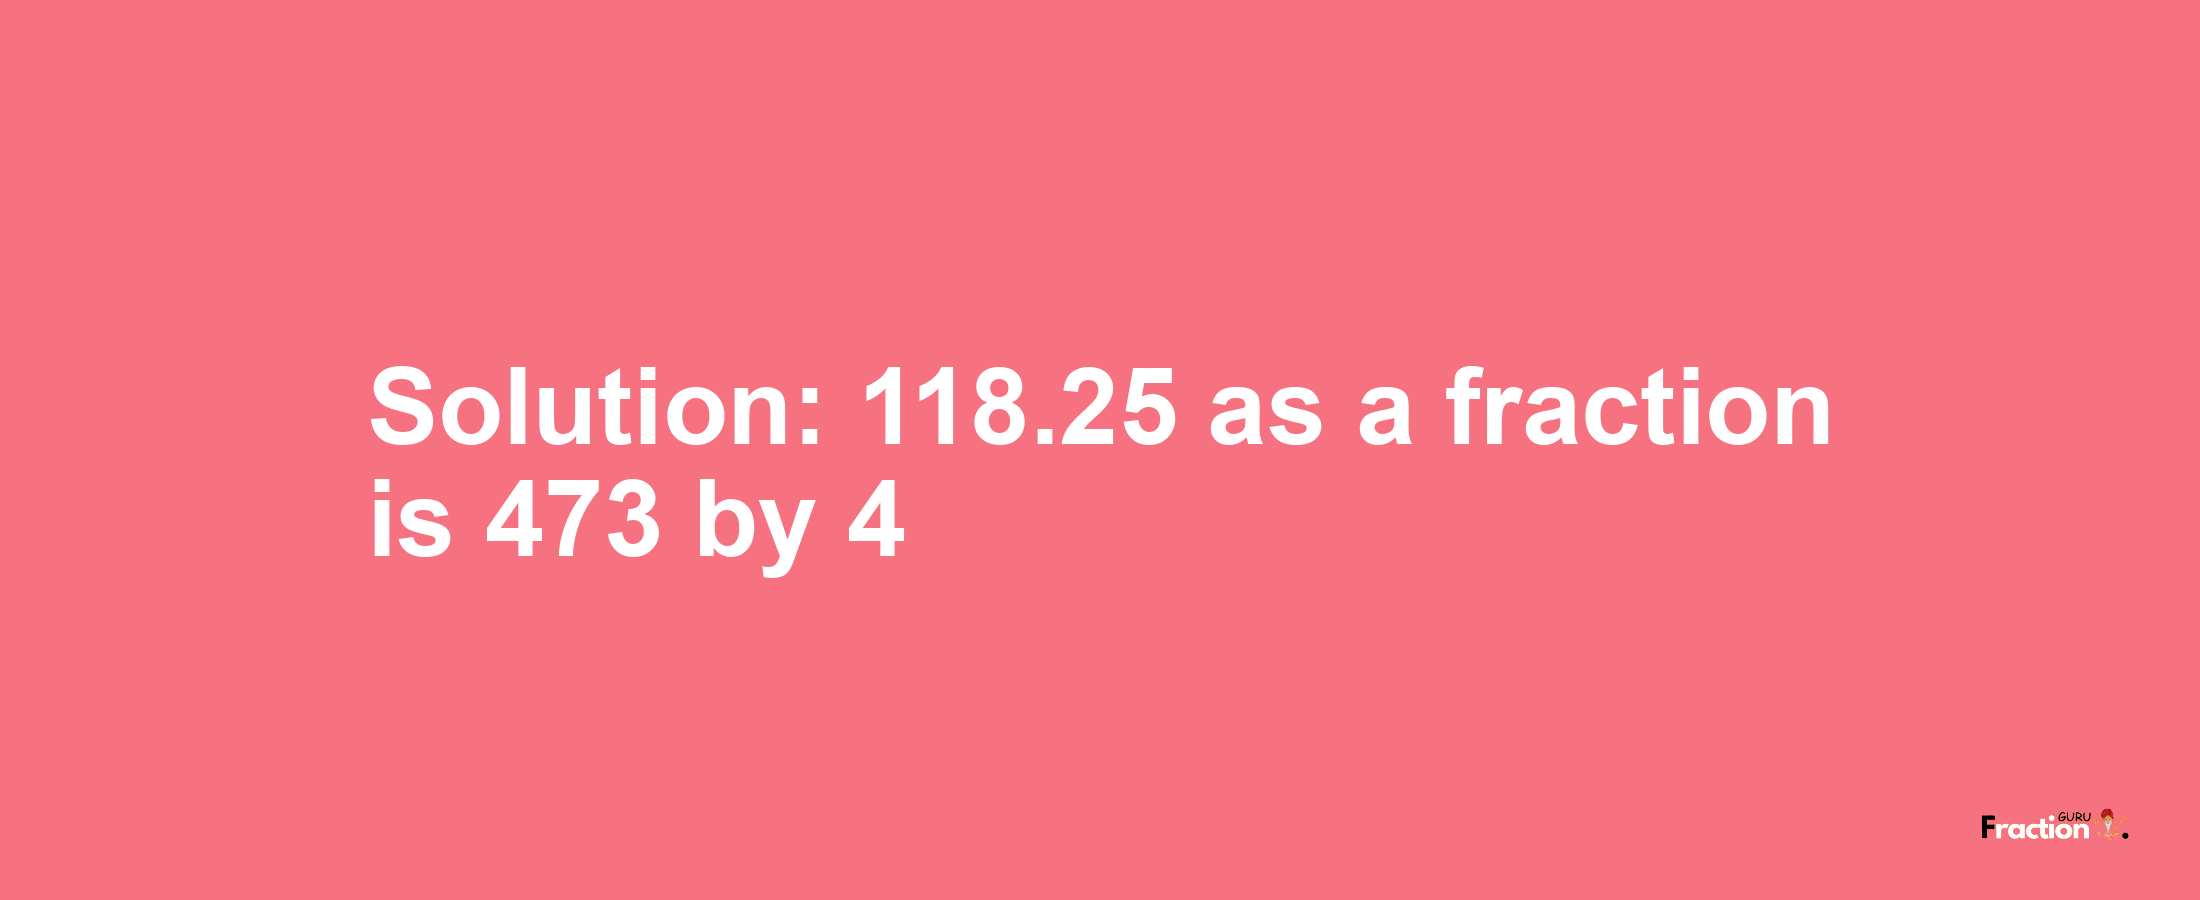 Solution:118.25 as a fraction is 473/4